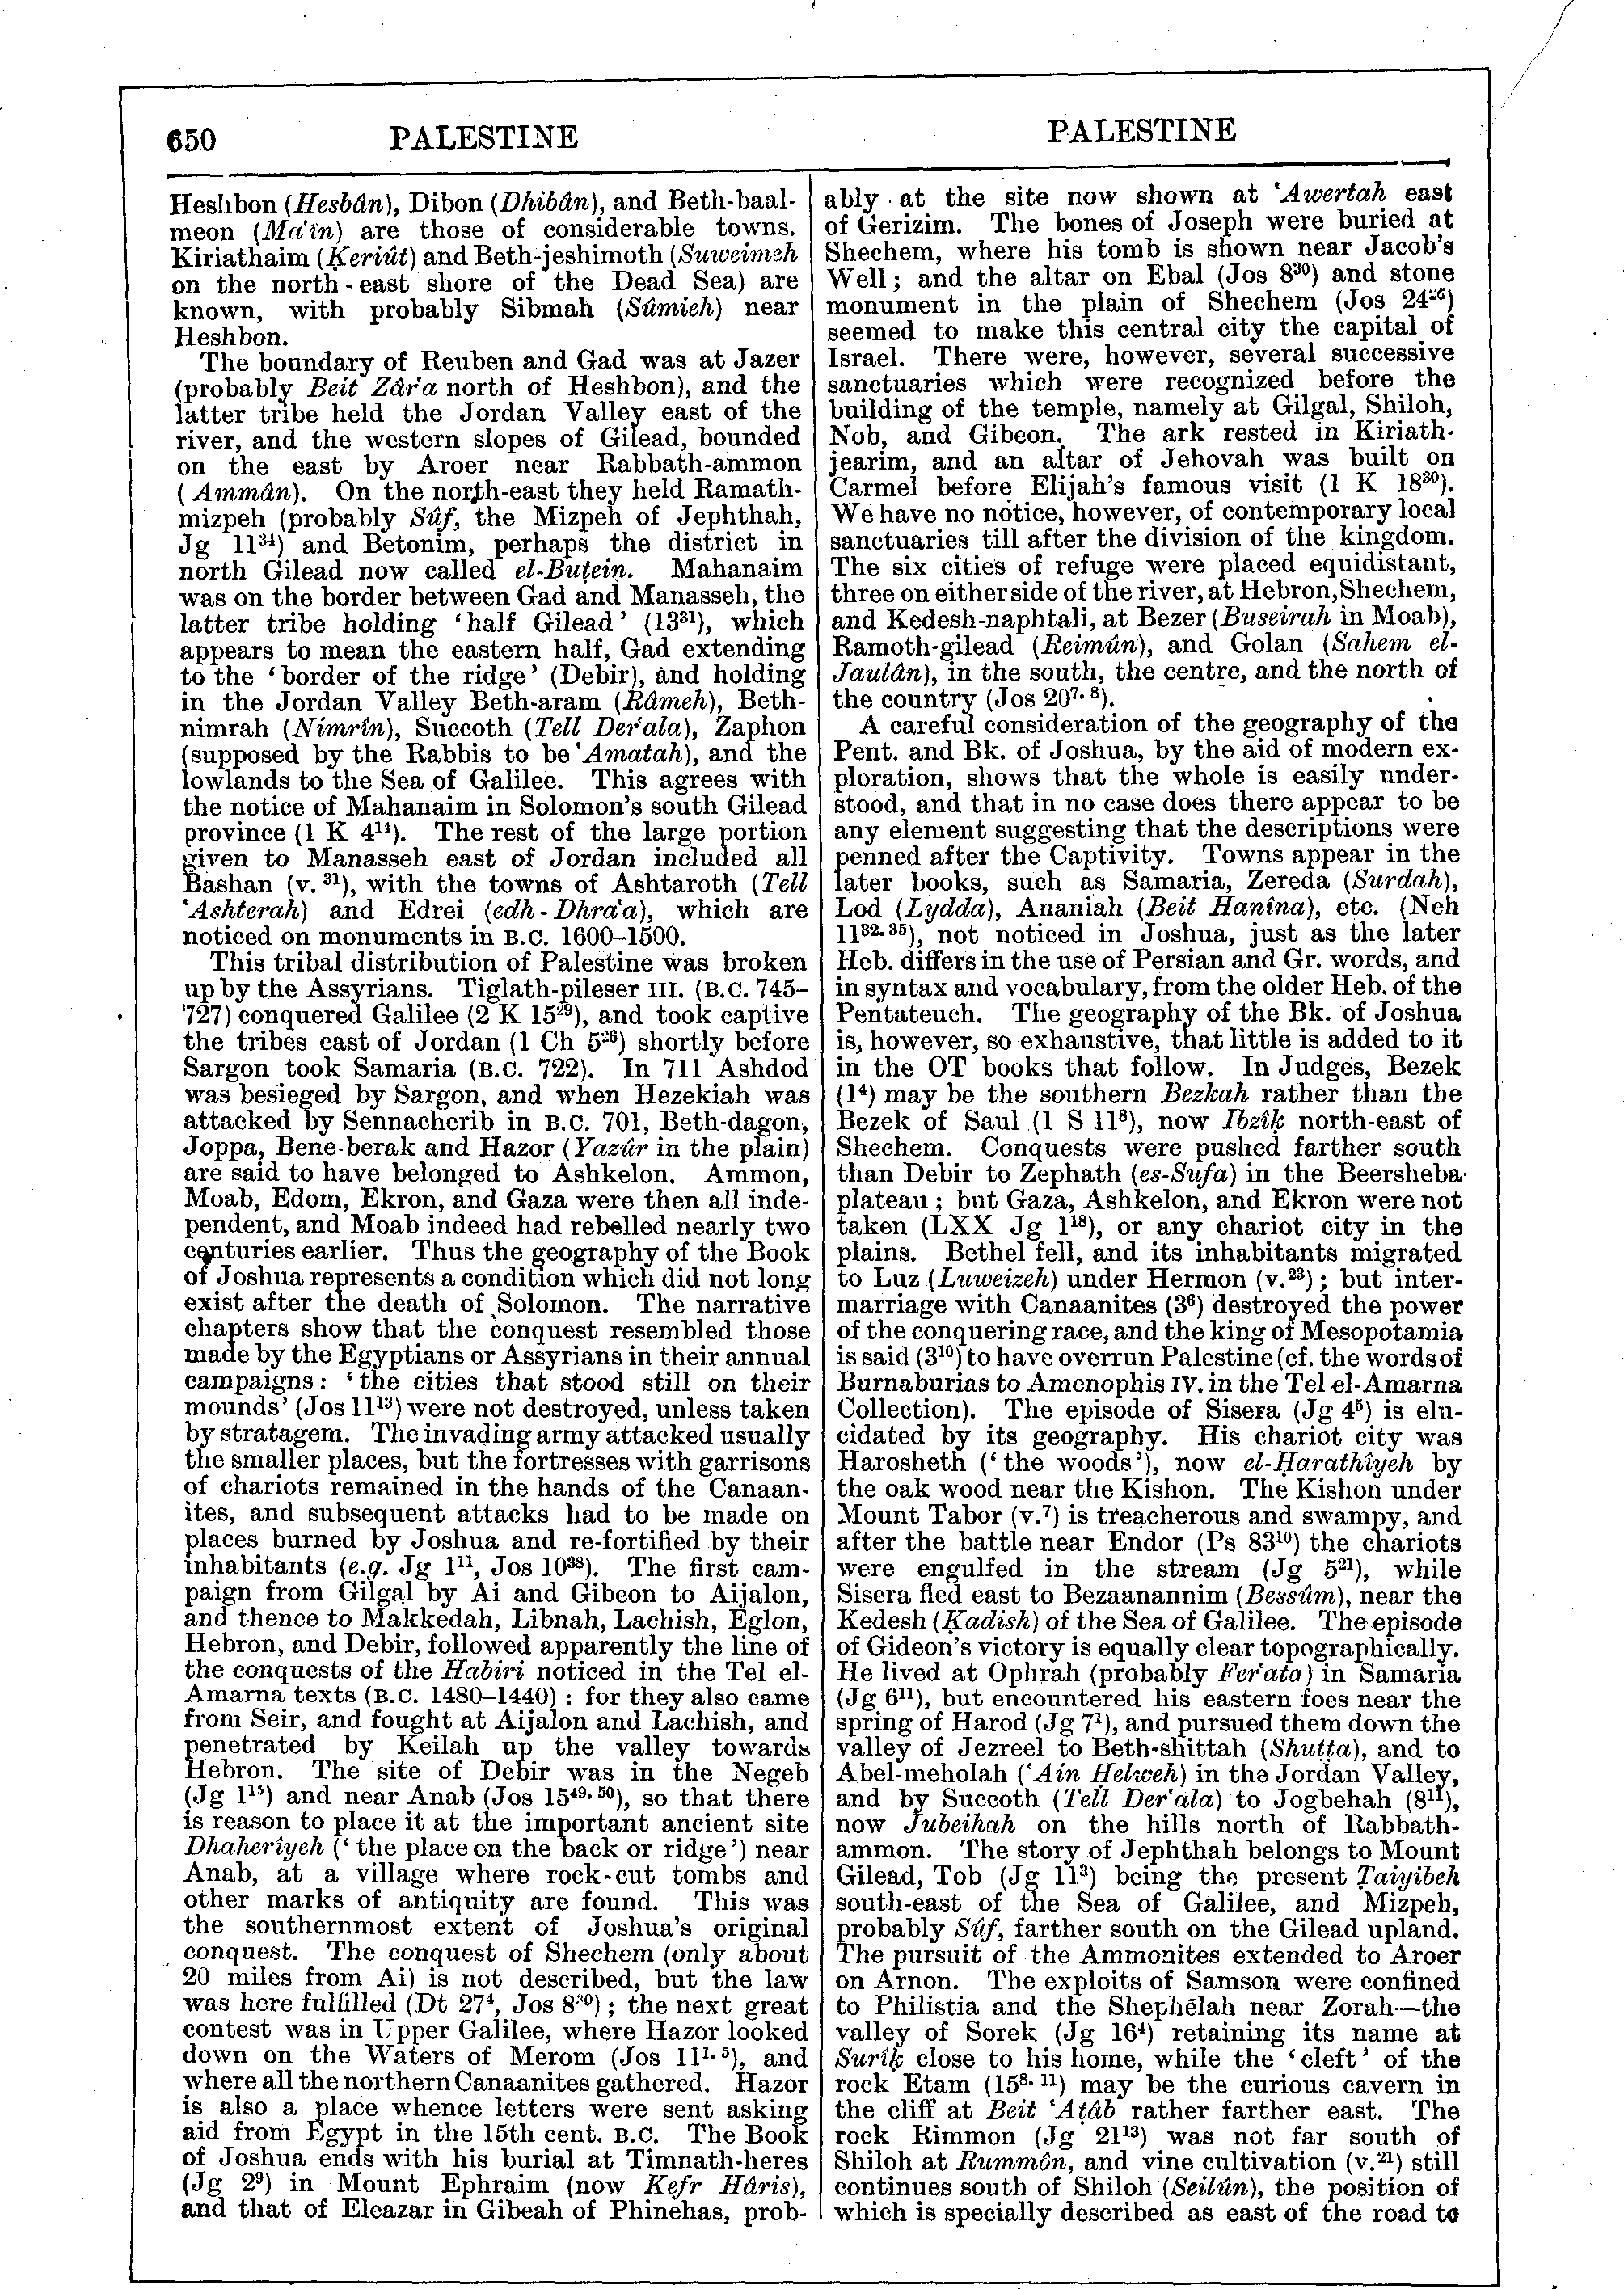 Image of page 650